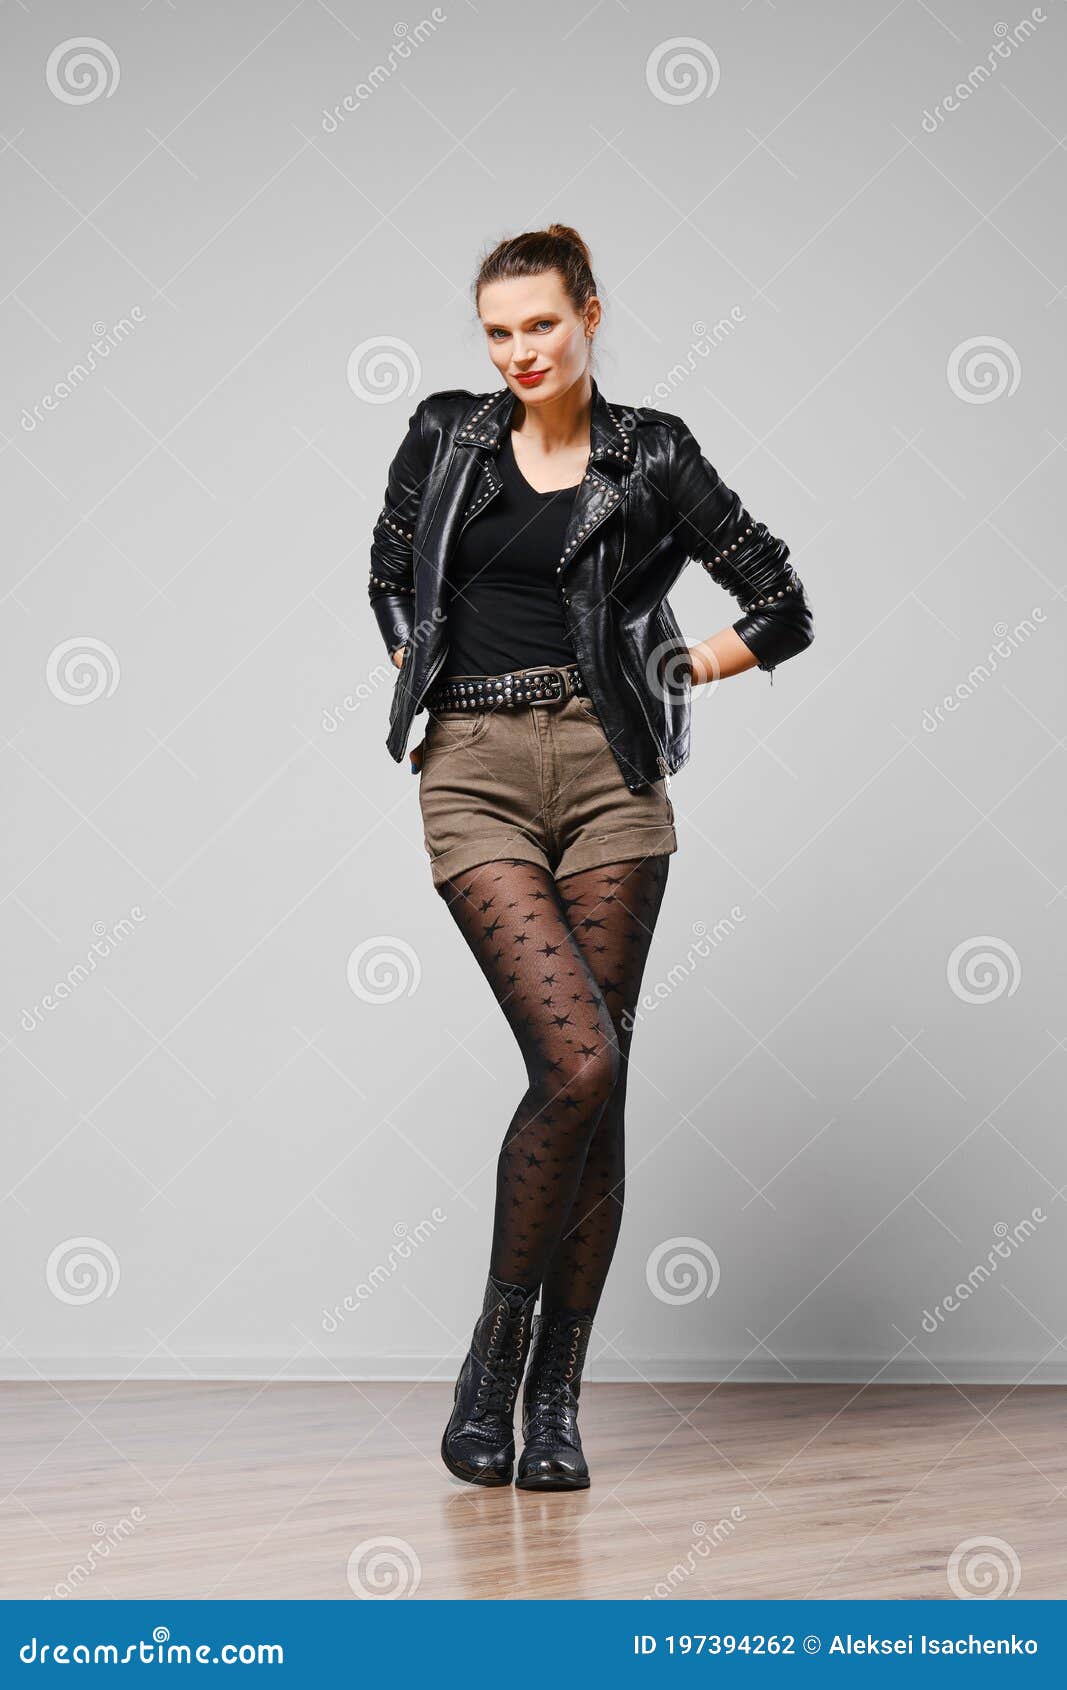 Full Length Portrait of a Woman in Leather Jacket, Shorts and Tights ...